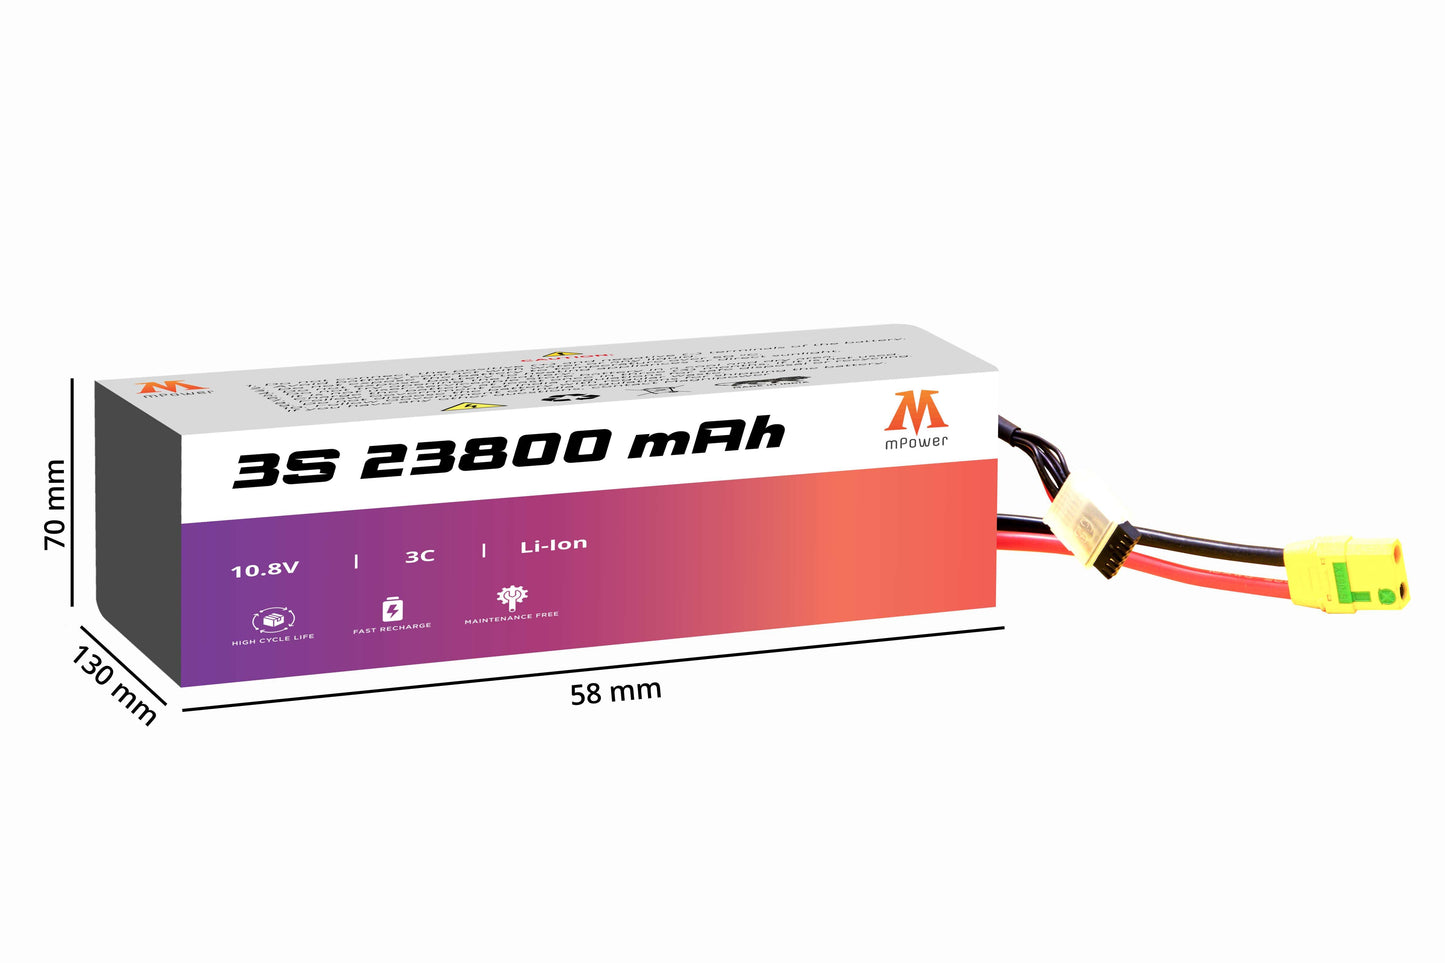 mPower 3S 23800mAh Lithium-Ion Battery for Surveillance Drones